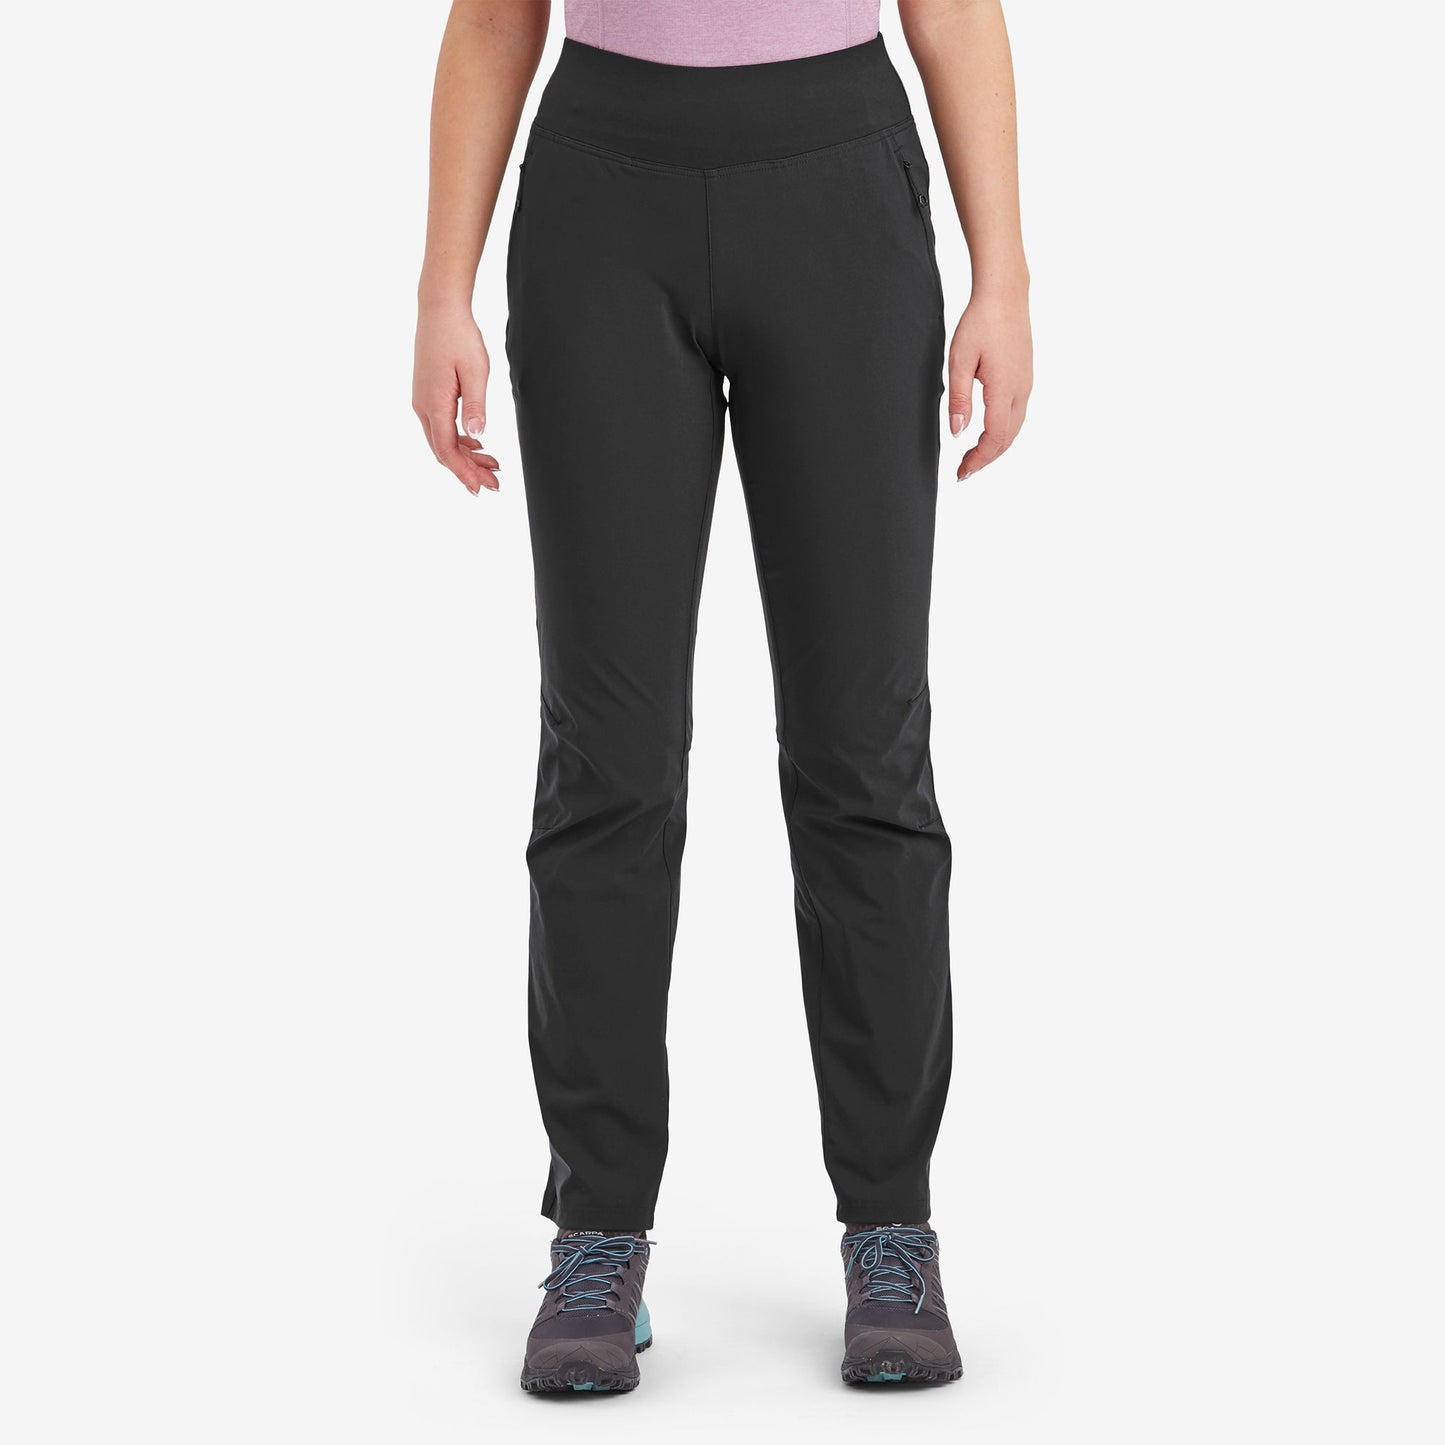 Montane Women's Tucana Lite Stretch Pants Stretchy, lightweight trousers for women